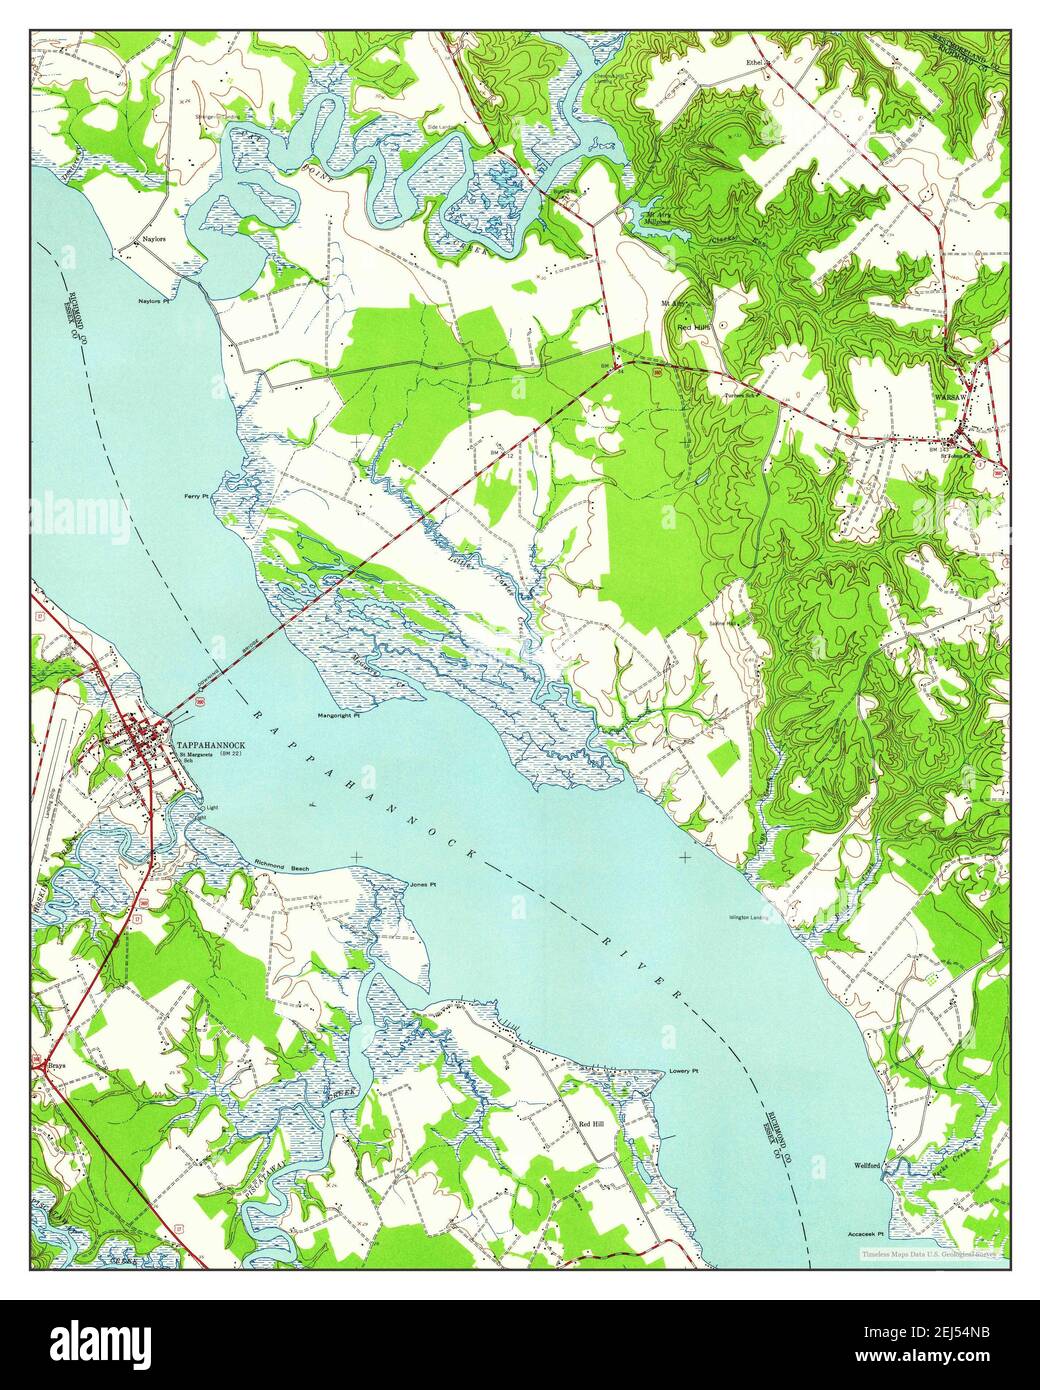 Tappahannock, Virginia, map 1944, 1:24000, United States of America by Timeless Maps, data U.S. Geological Survey Stock Photo